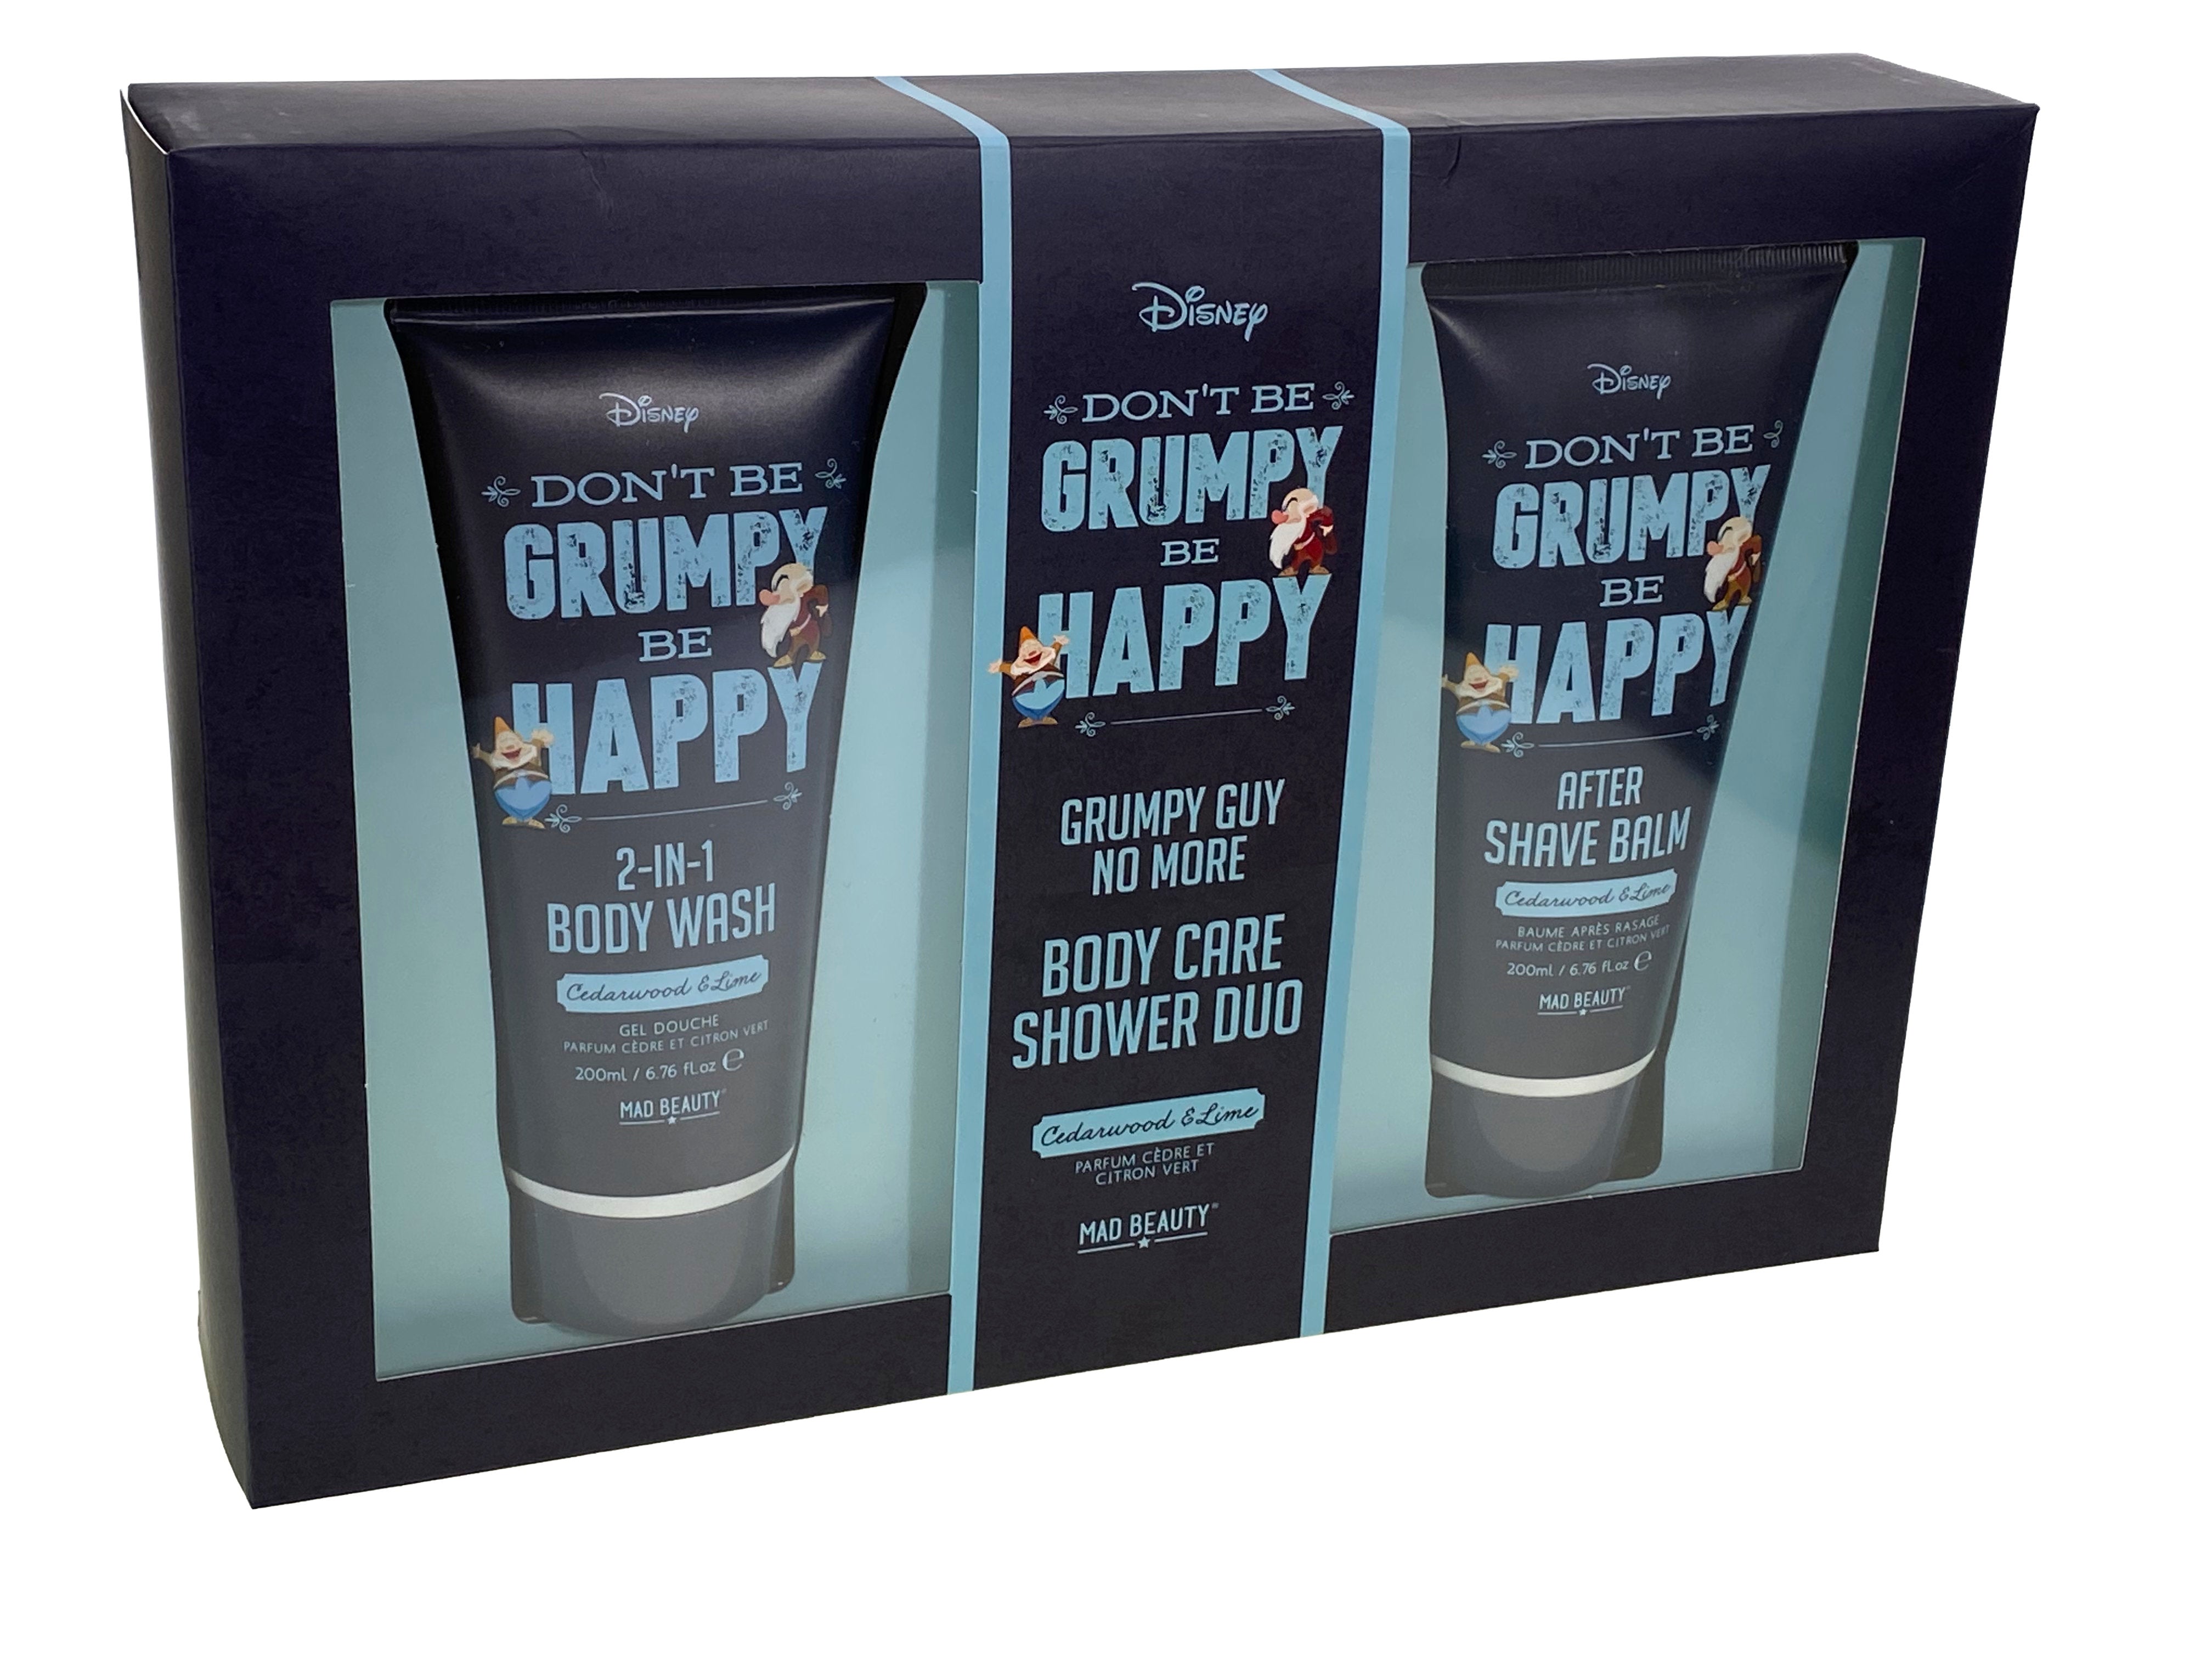 Don't Be Grumpy - Body Care Shower Duo    